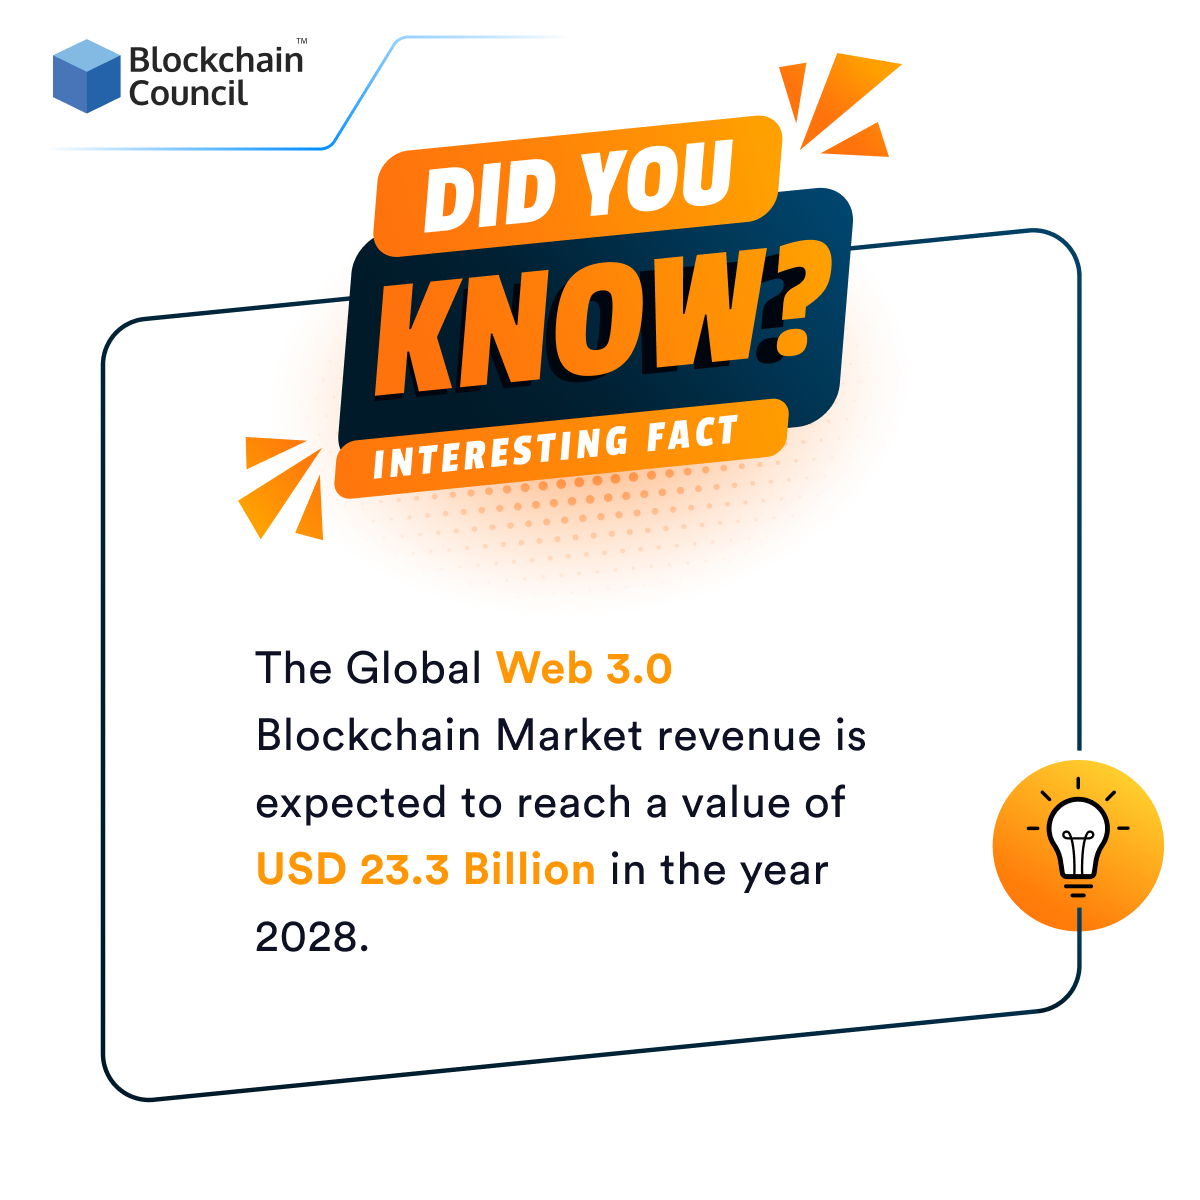 The Global Web 3.0 Blockchain Market revenue is expected to reach a value of USD 23.3 Billion in the year 2028.